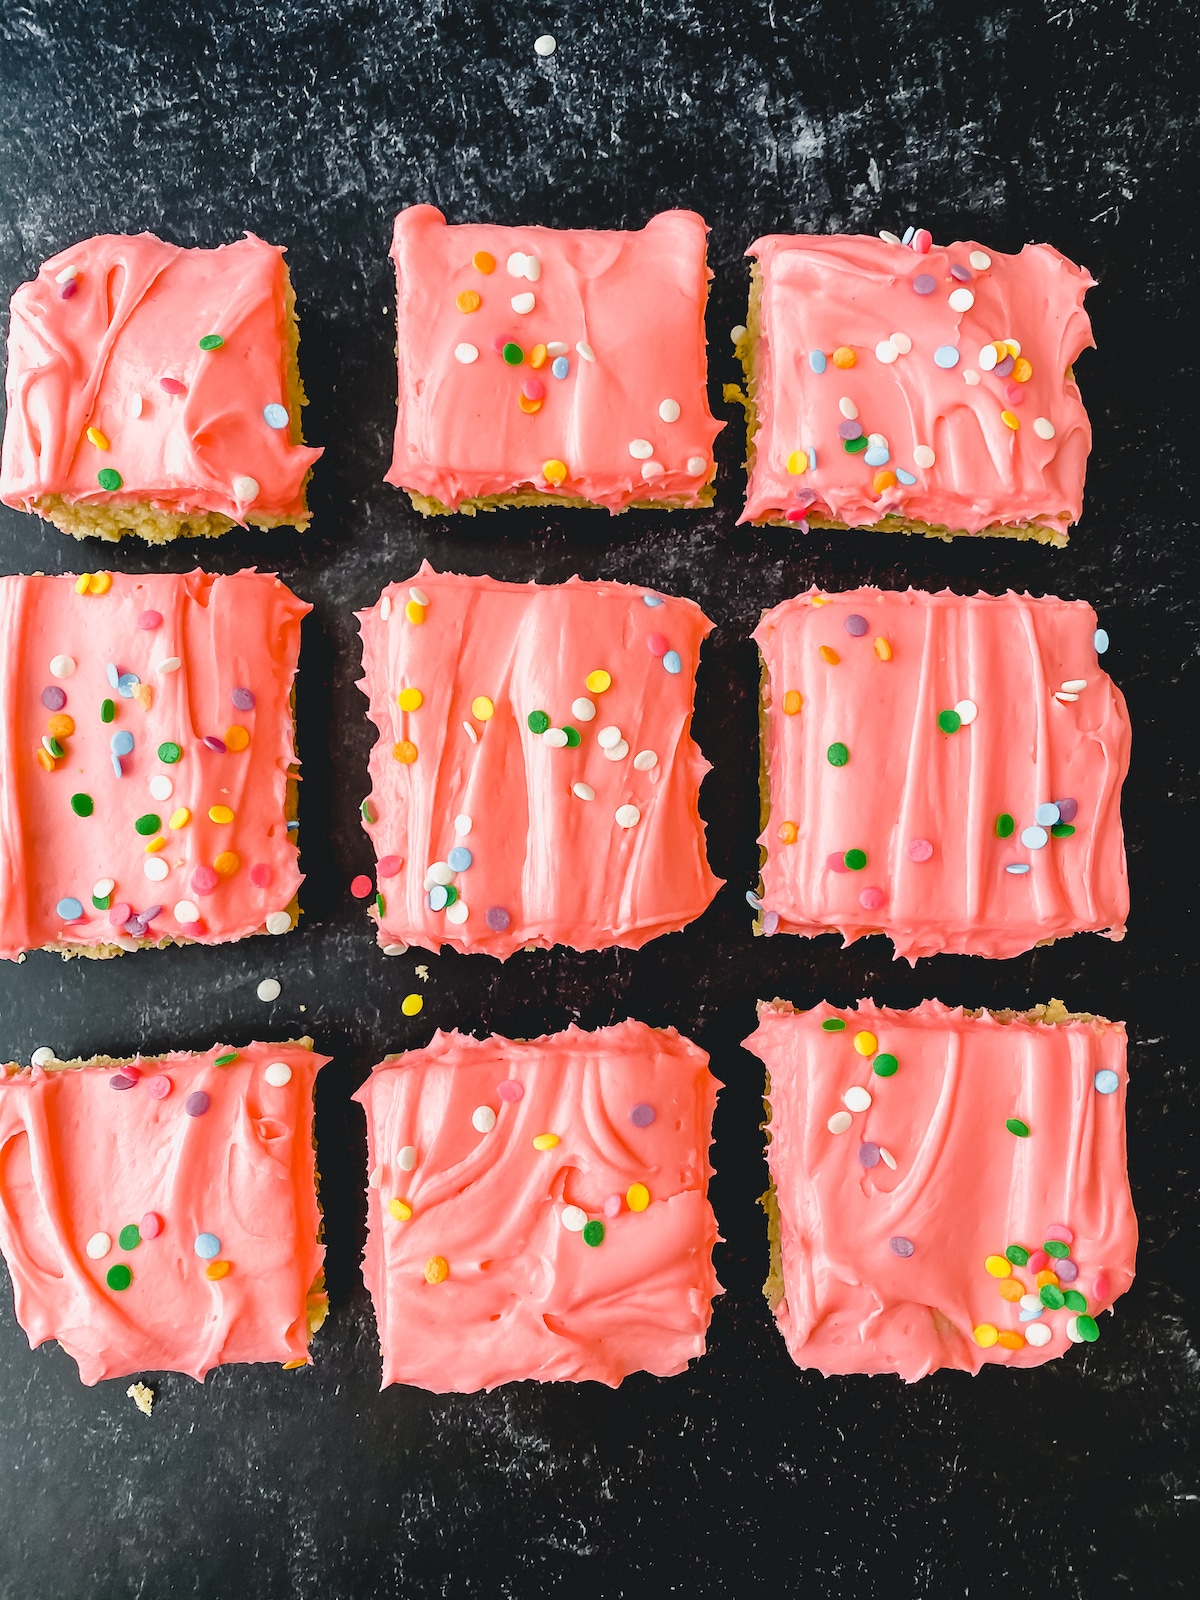 Pink frosted bars on black table